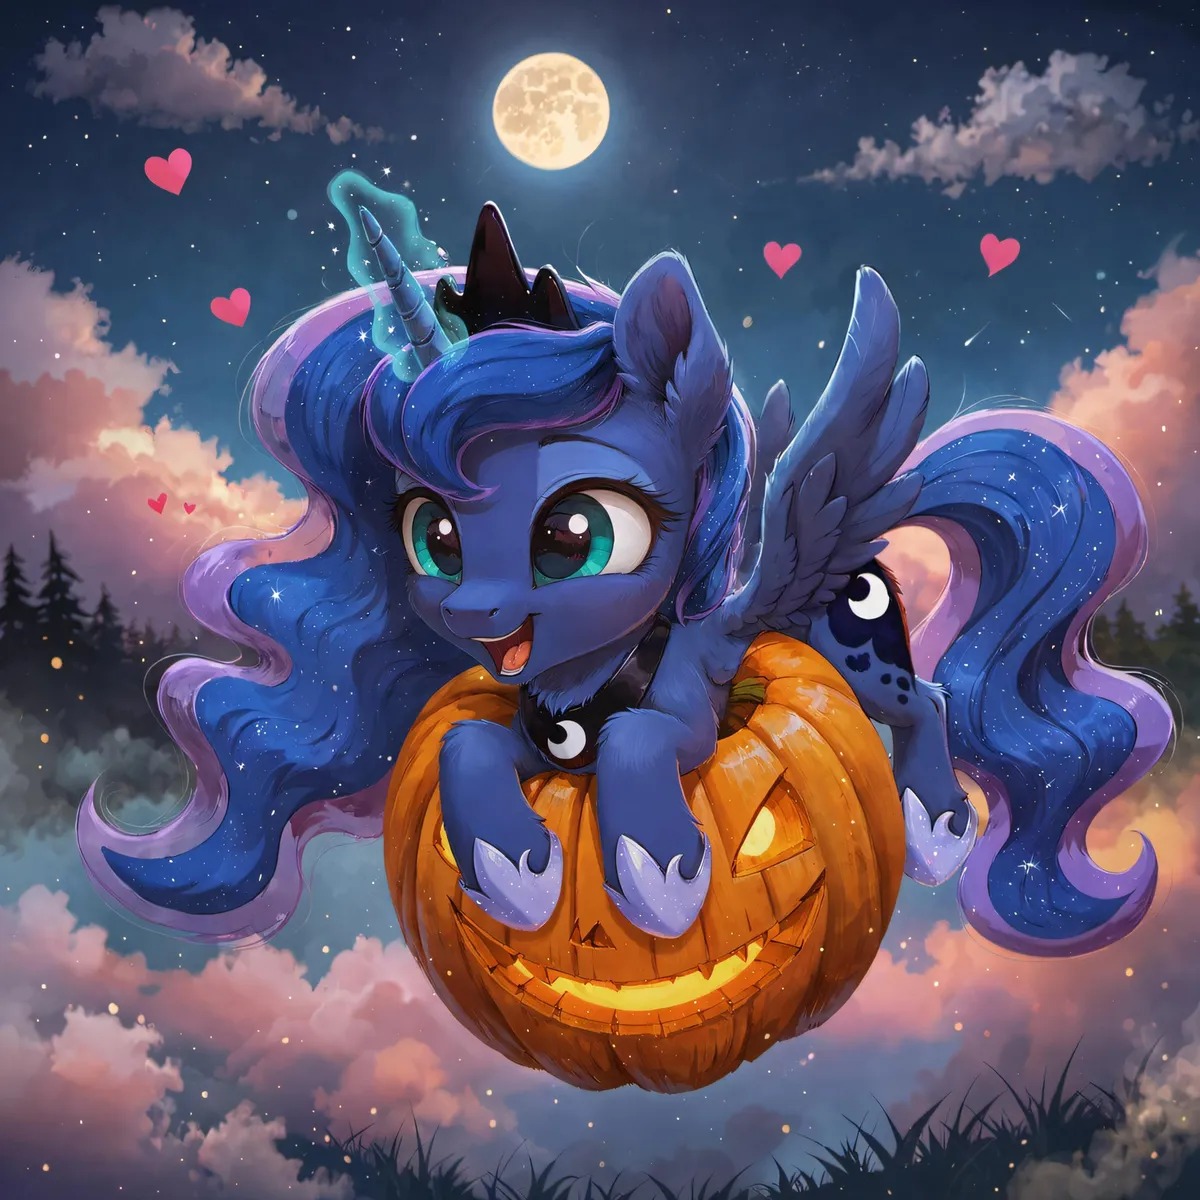 A cute cartoon pony with wings and a unicorn horn, with a black crown and glowing eyes, is joyfully sticking out of a carved Halloween pumpkin against a night sky with a full moon and heart shapes in the background. This is an AI generated image using Stable Diffusion.